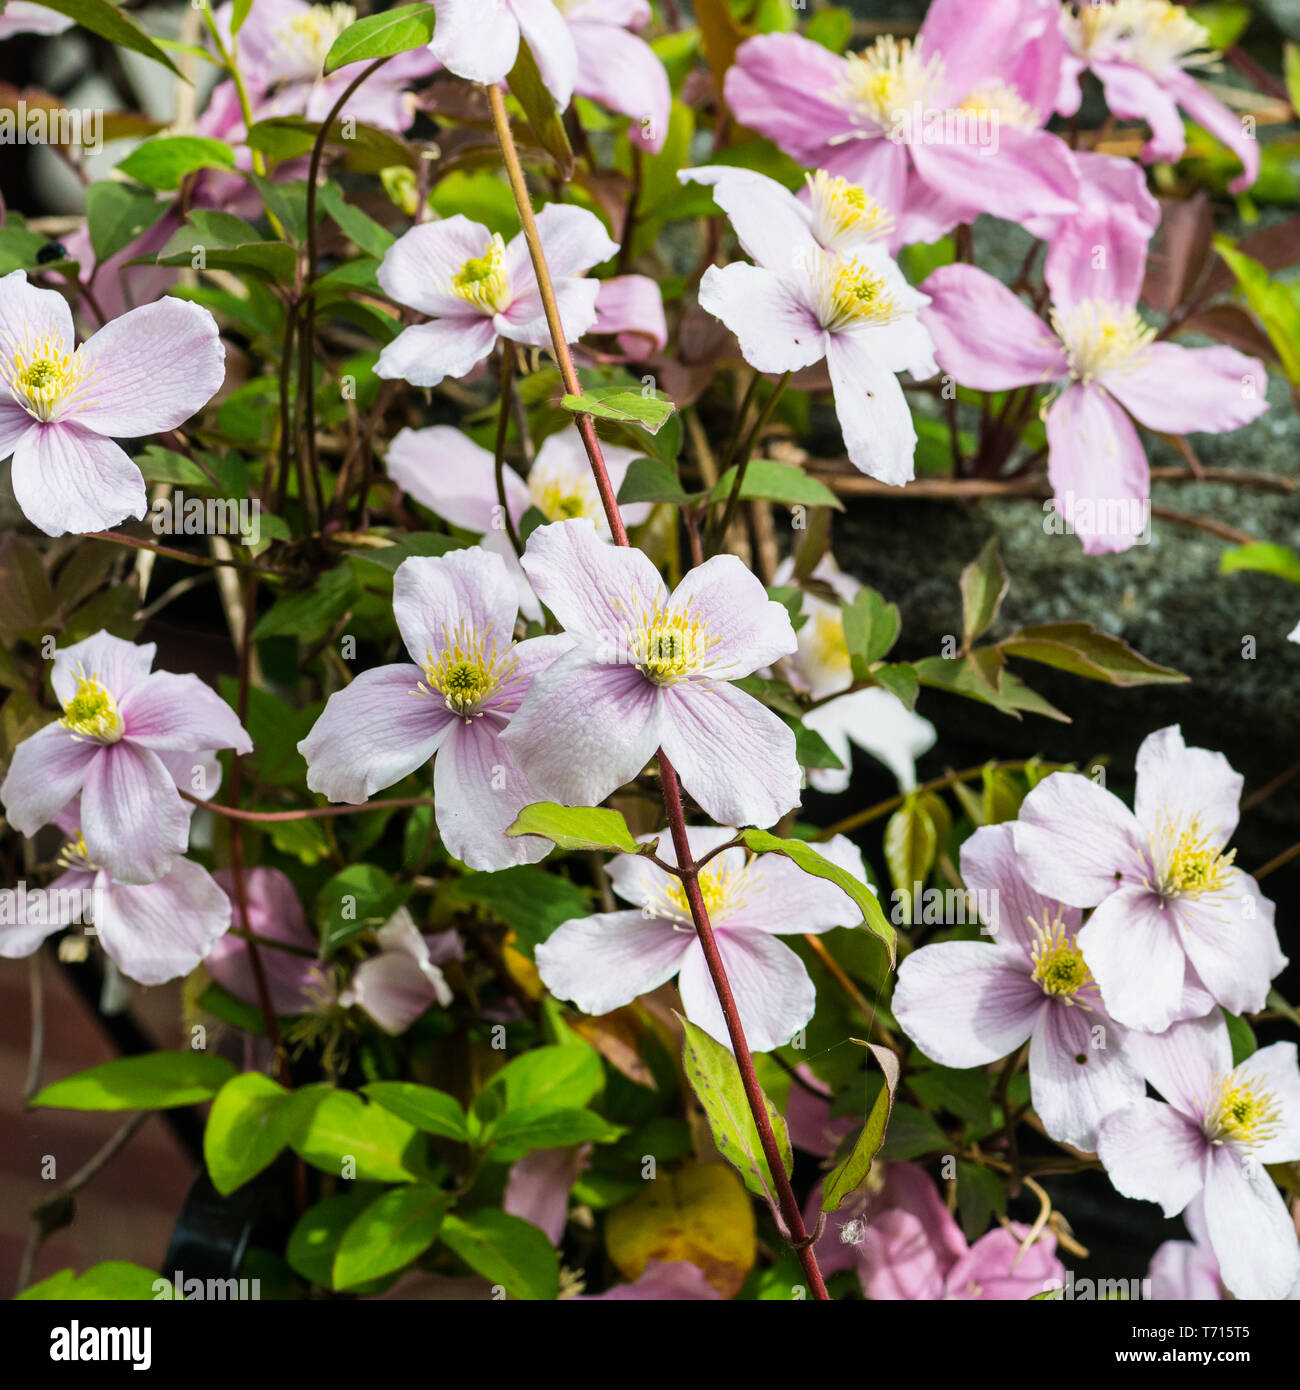 A shot of some blooms of a clematis montana plant. Stock Photo